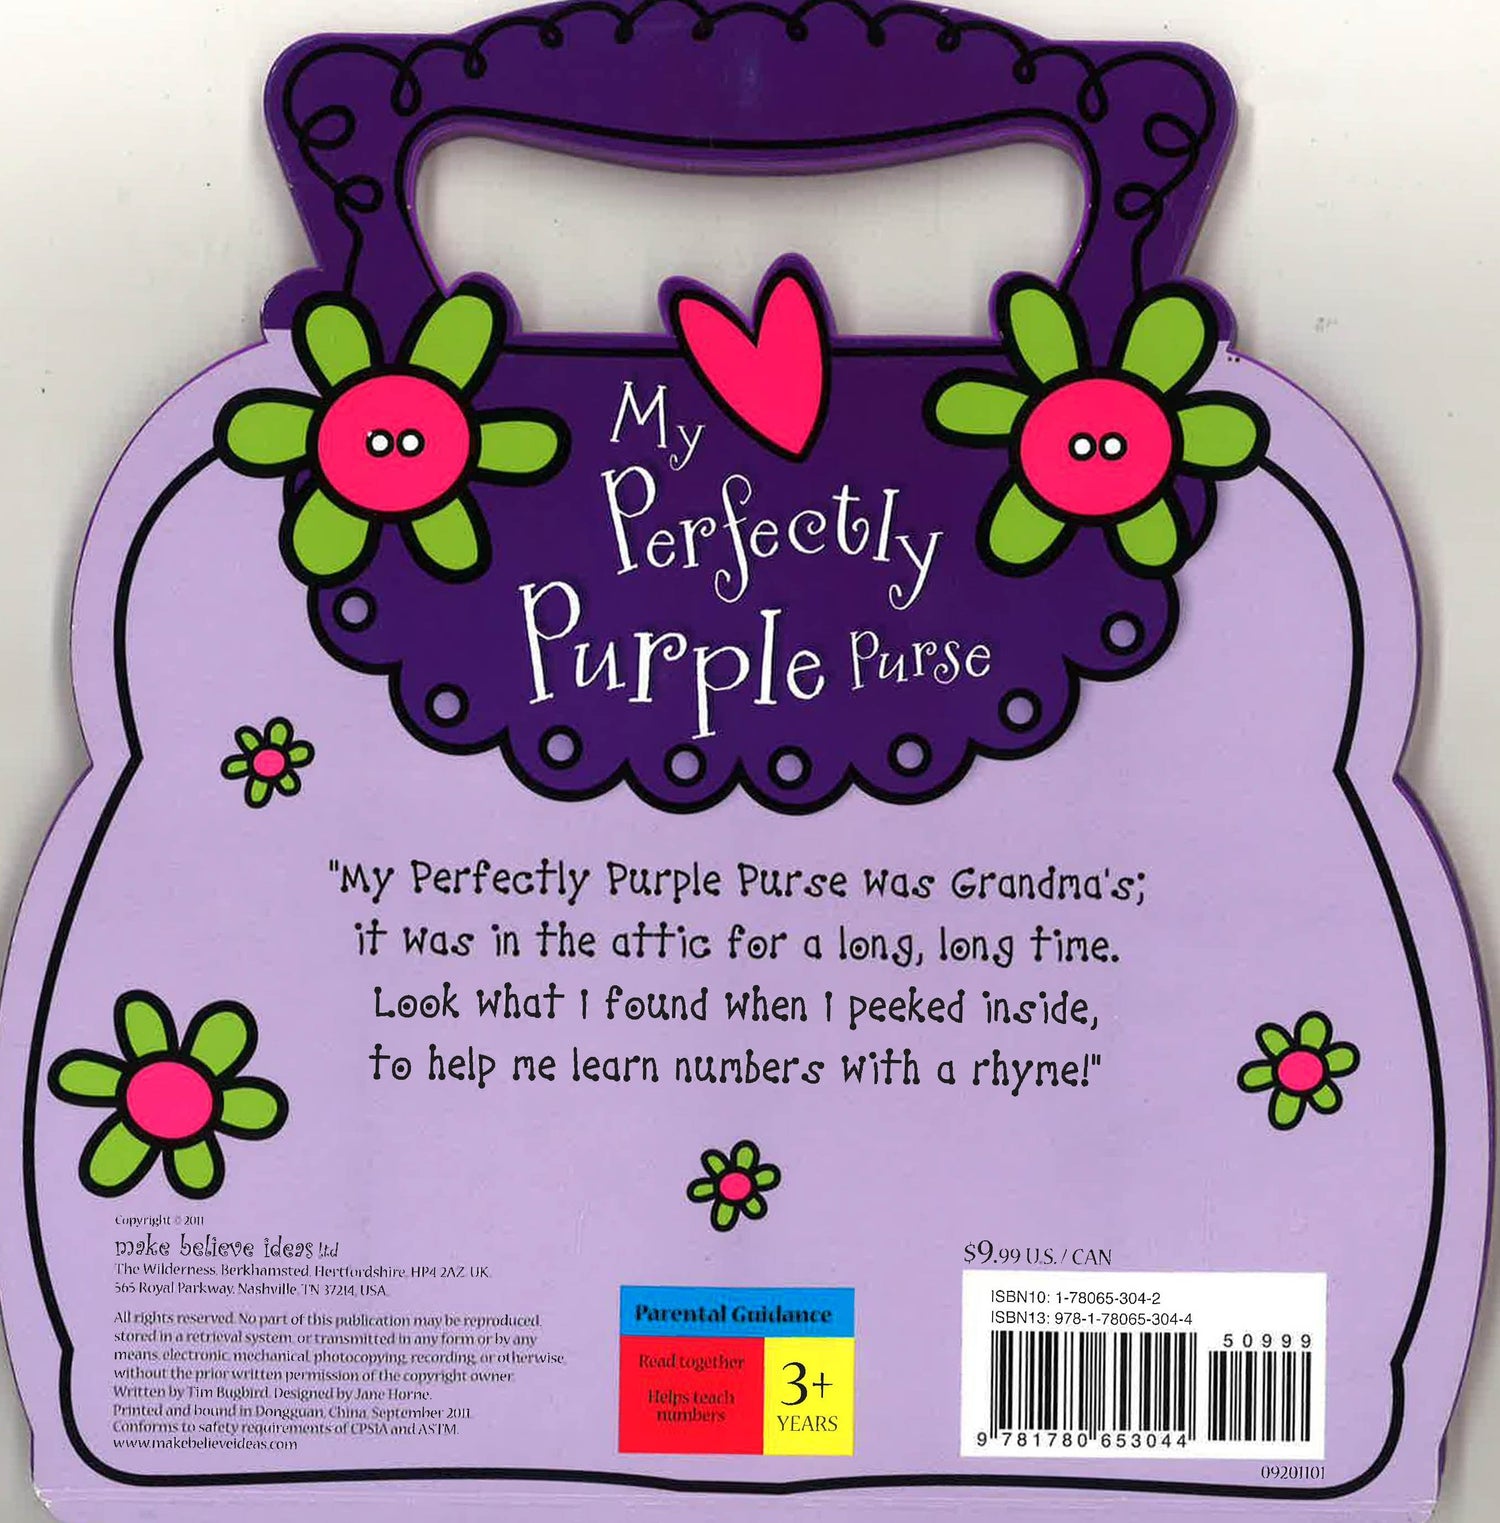 Buy Lilly's Purple Plastic Purse Book Online at Low Prices in India |  Lilly's Purple Plastic Purse Reviews & Ratings - Amazon.in